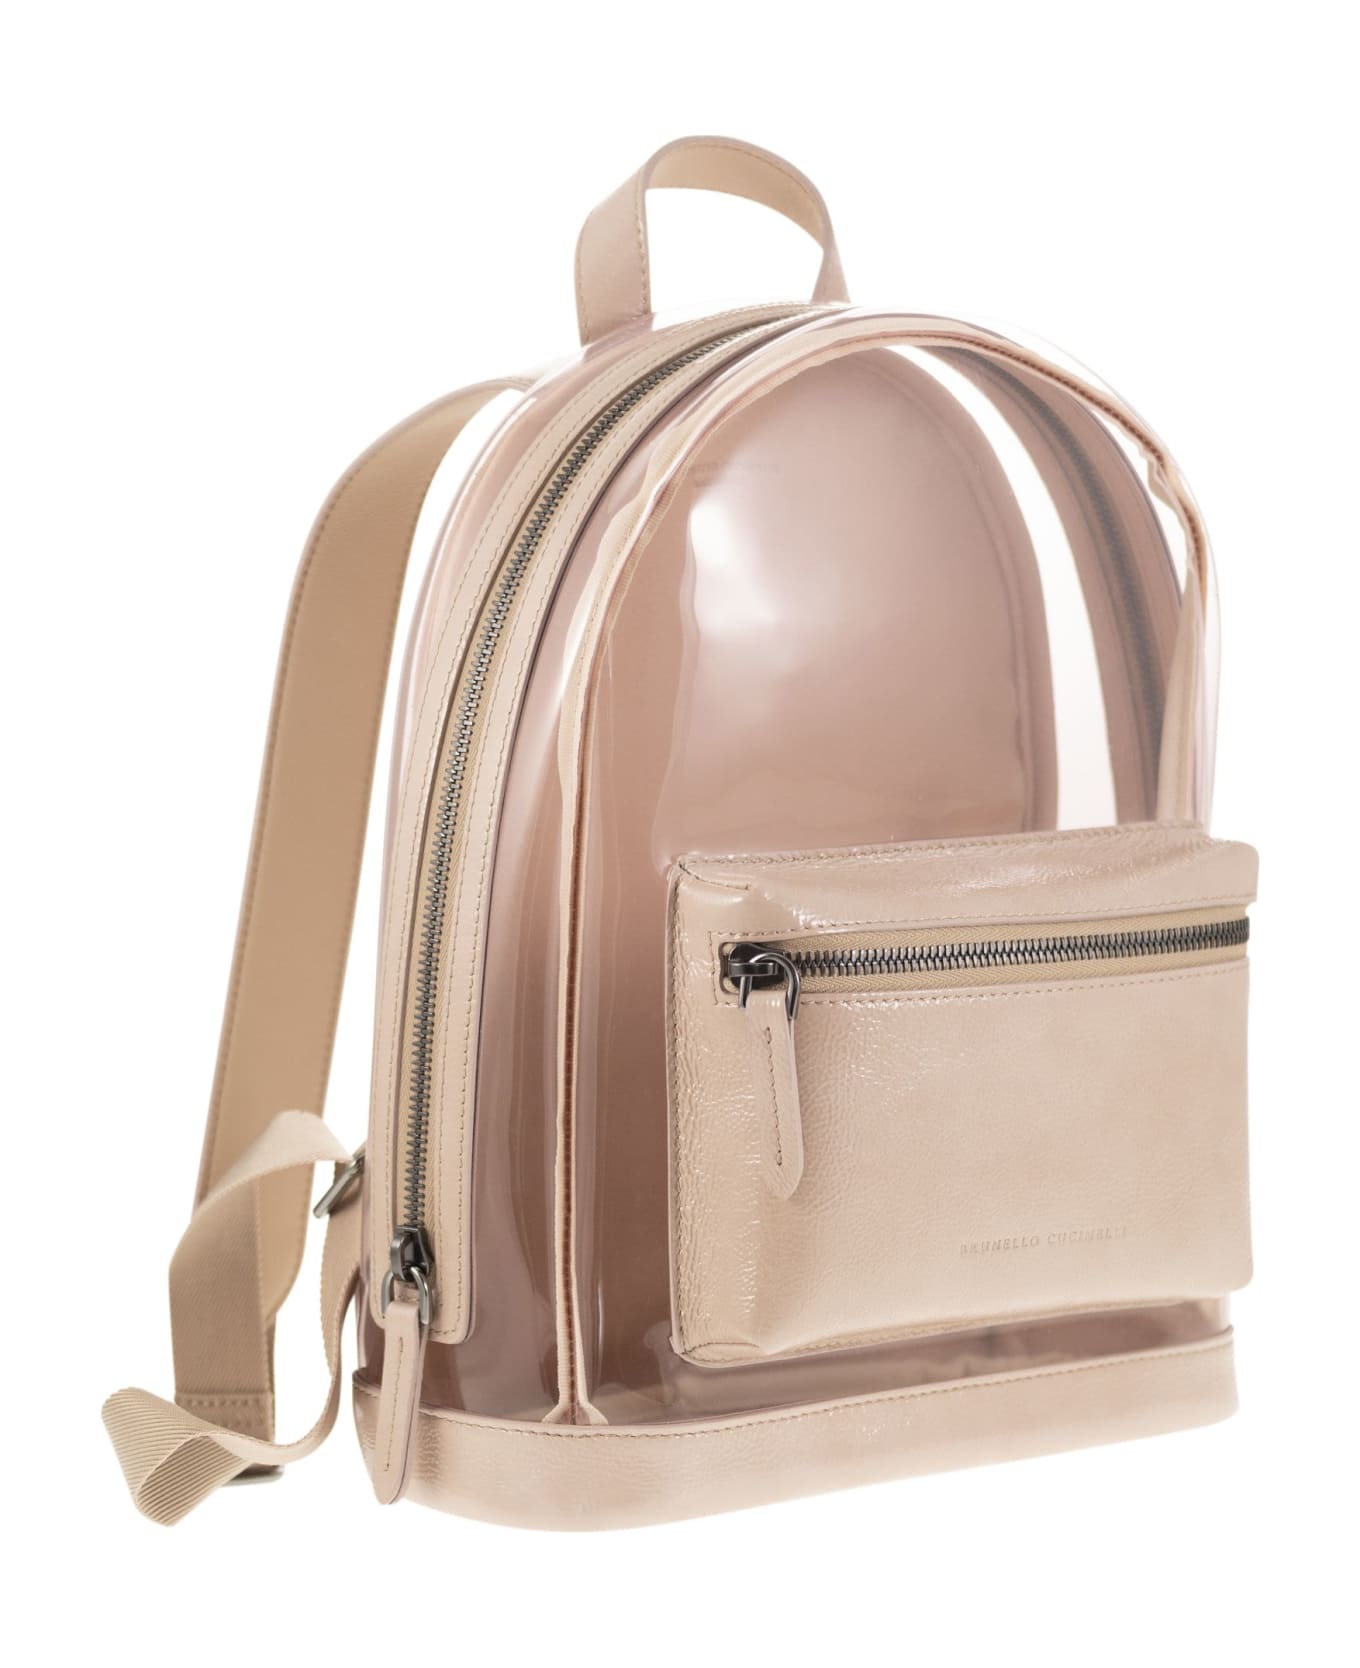 Brunello Cucinelli Sleek Pvc And Leather Backpack - Pink